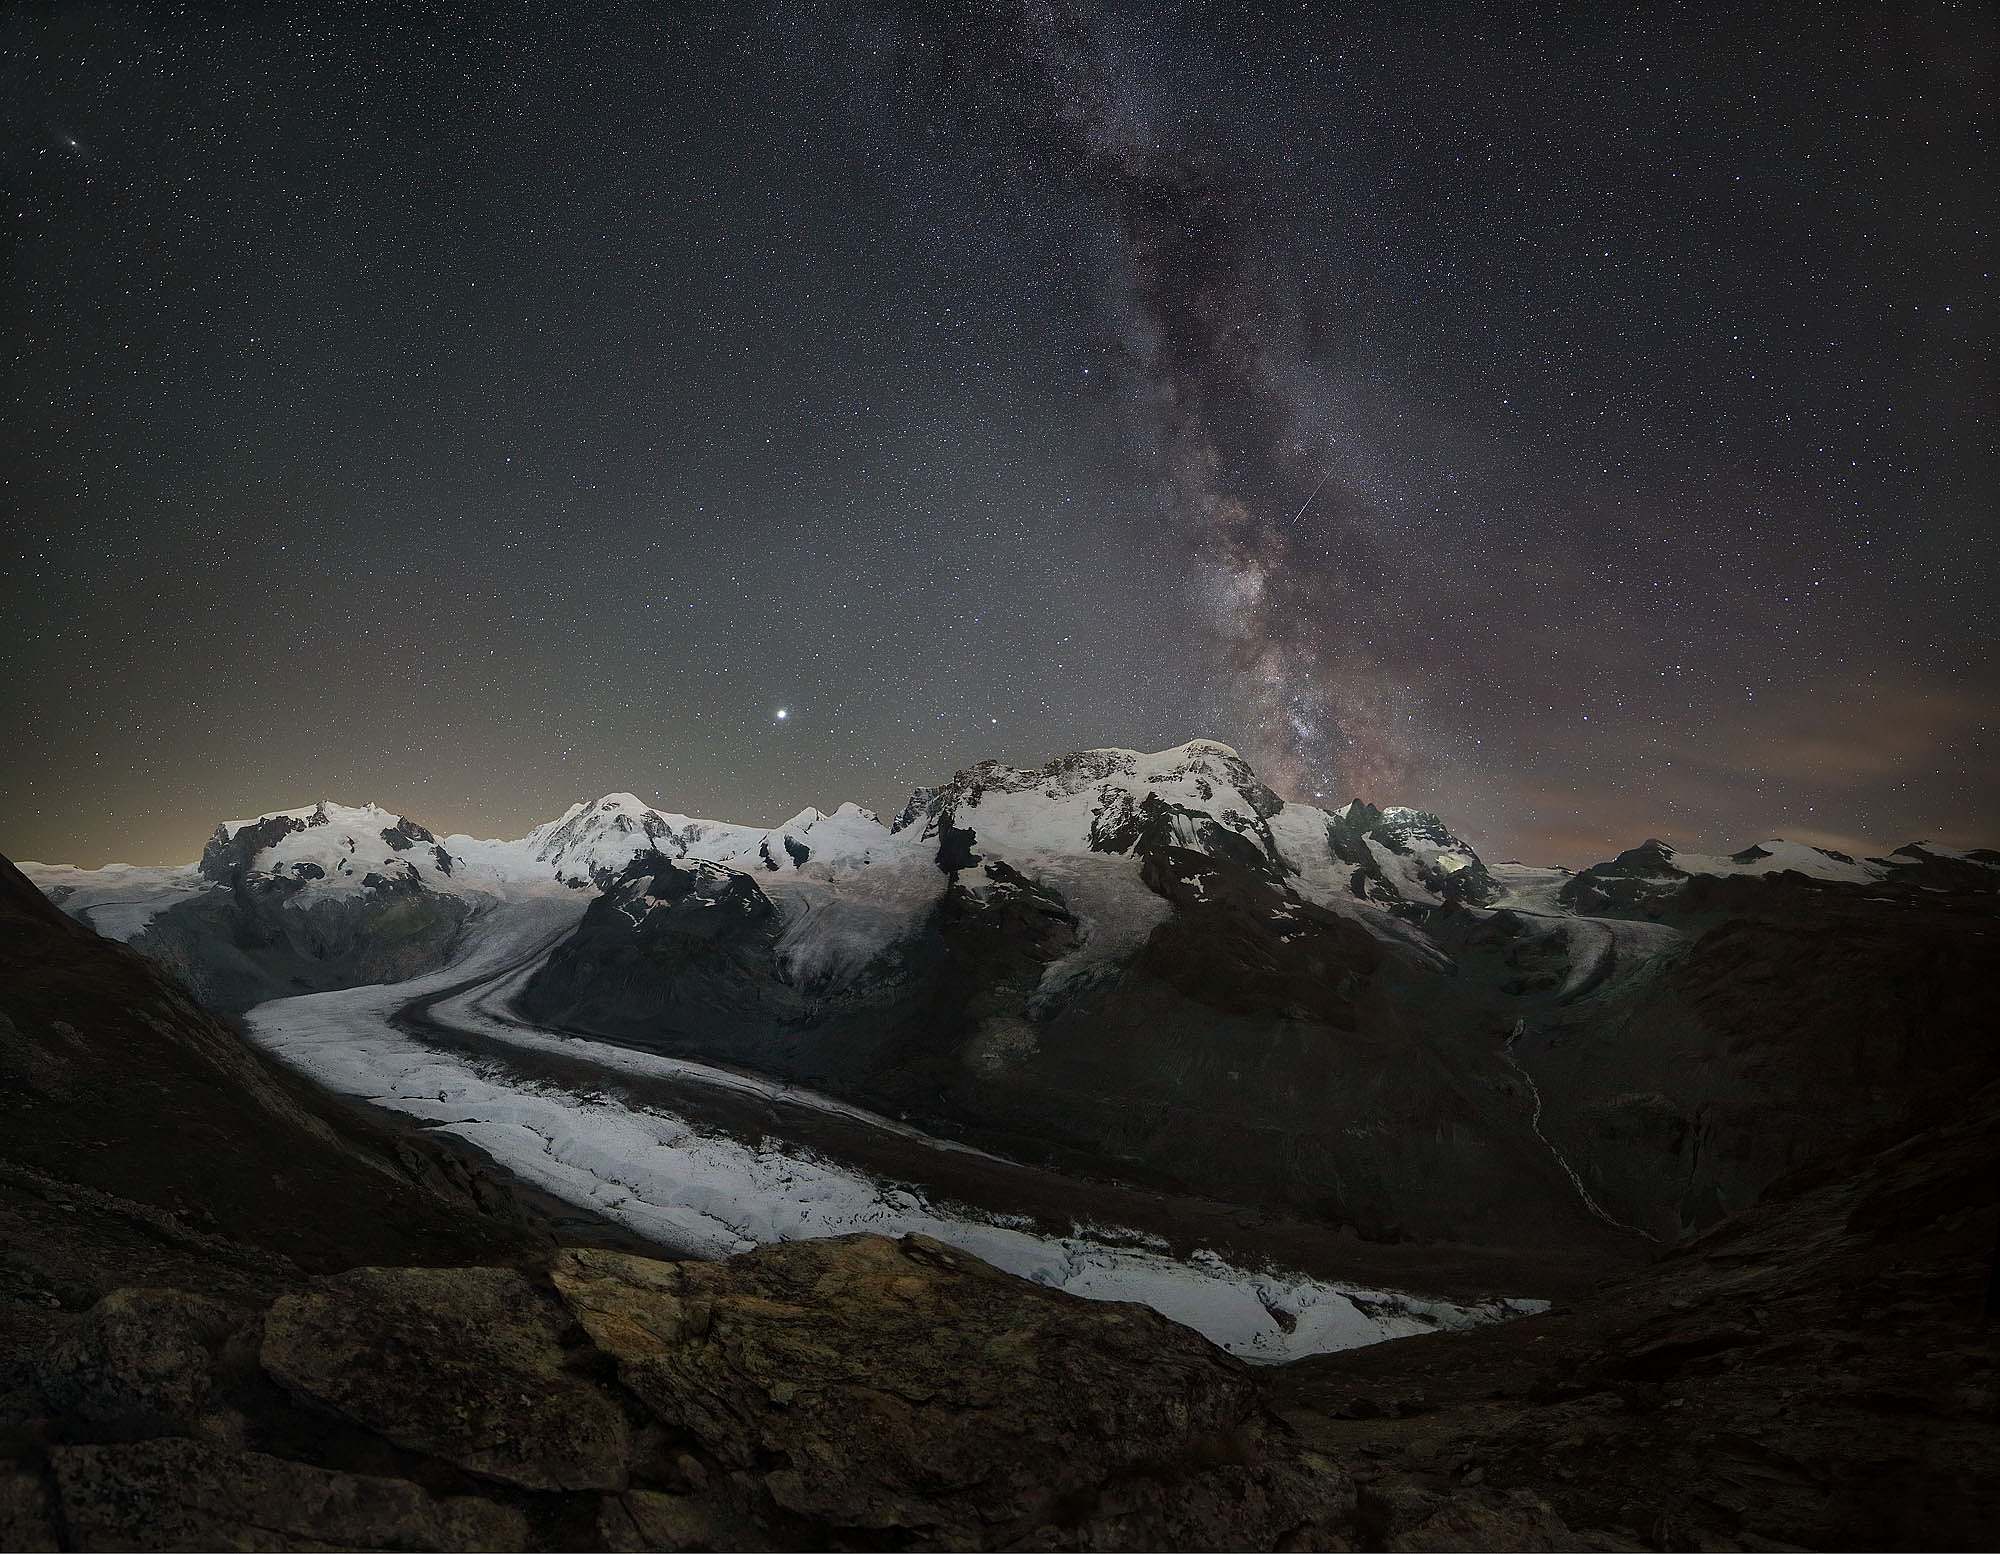 The Monte Rosa mountain range with the Gorner glacier on the Gornergrat at night with the Milky Way and a Perseids shooting star.